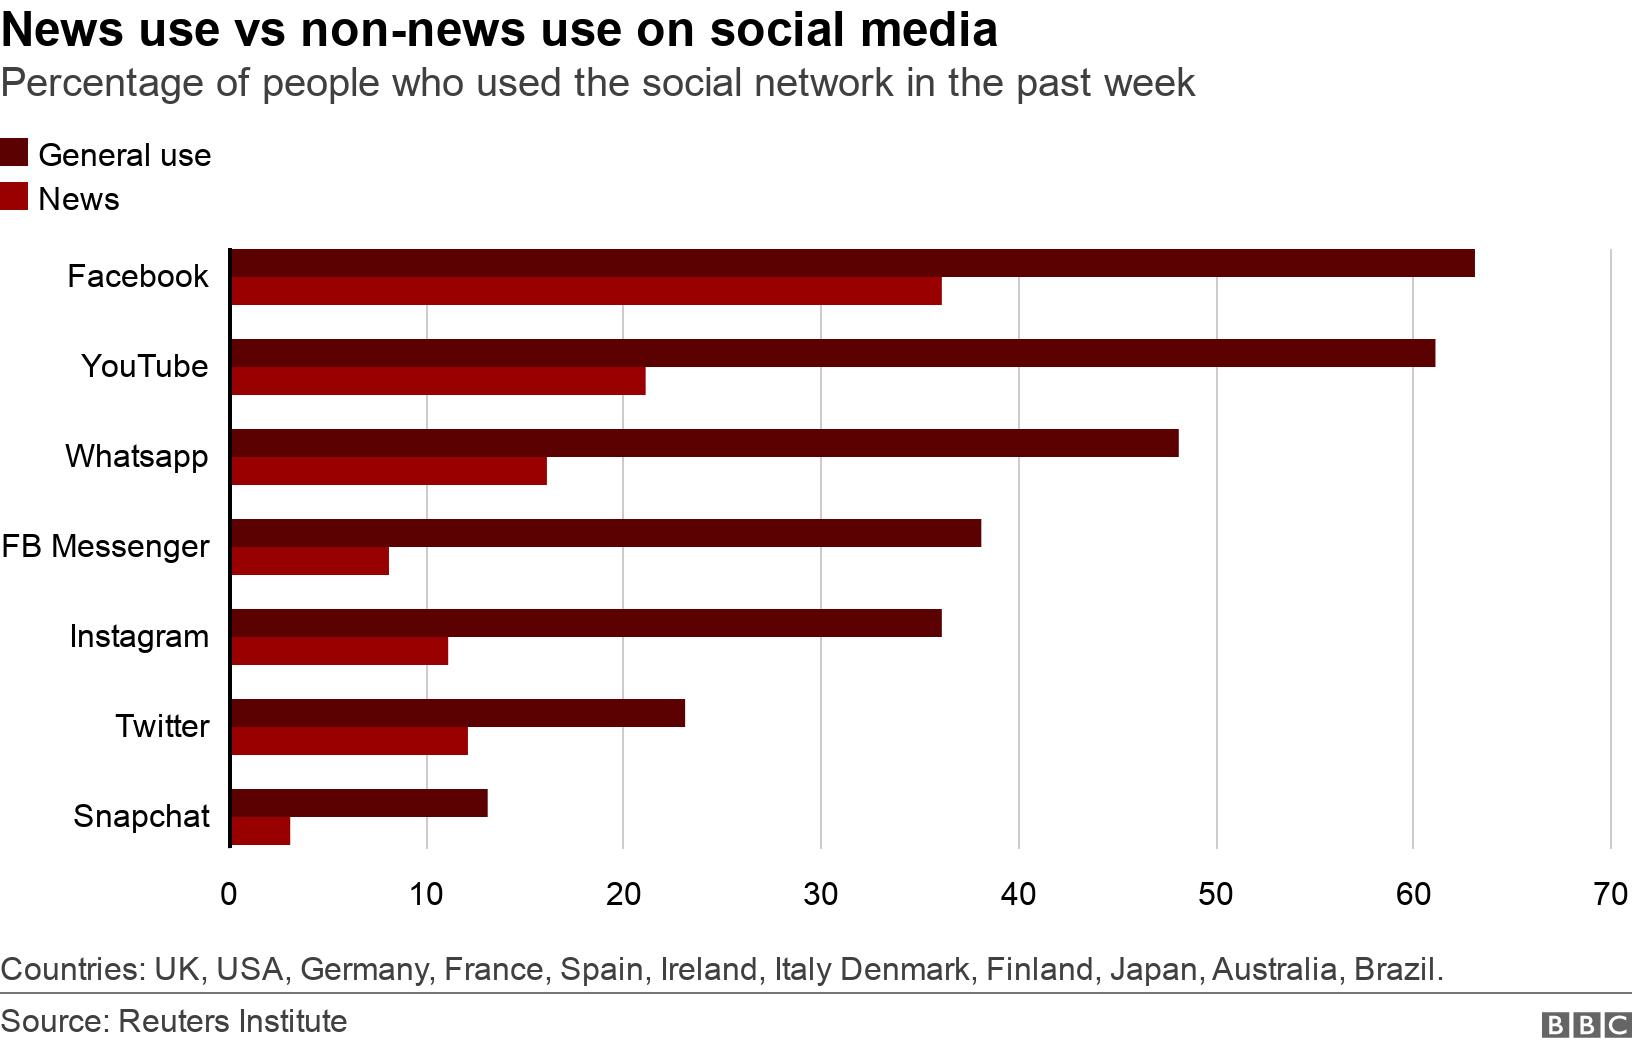 News use vs non-news use on social media. Percentage of people who used the social network in the past week.  Countries: UK, USA, Germany, France, Spain, Ireland, Italy Denmark, Finland, Japan, Australia, Brazil..